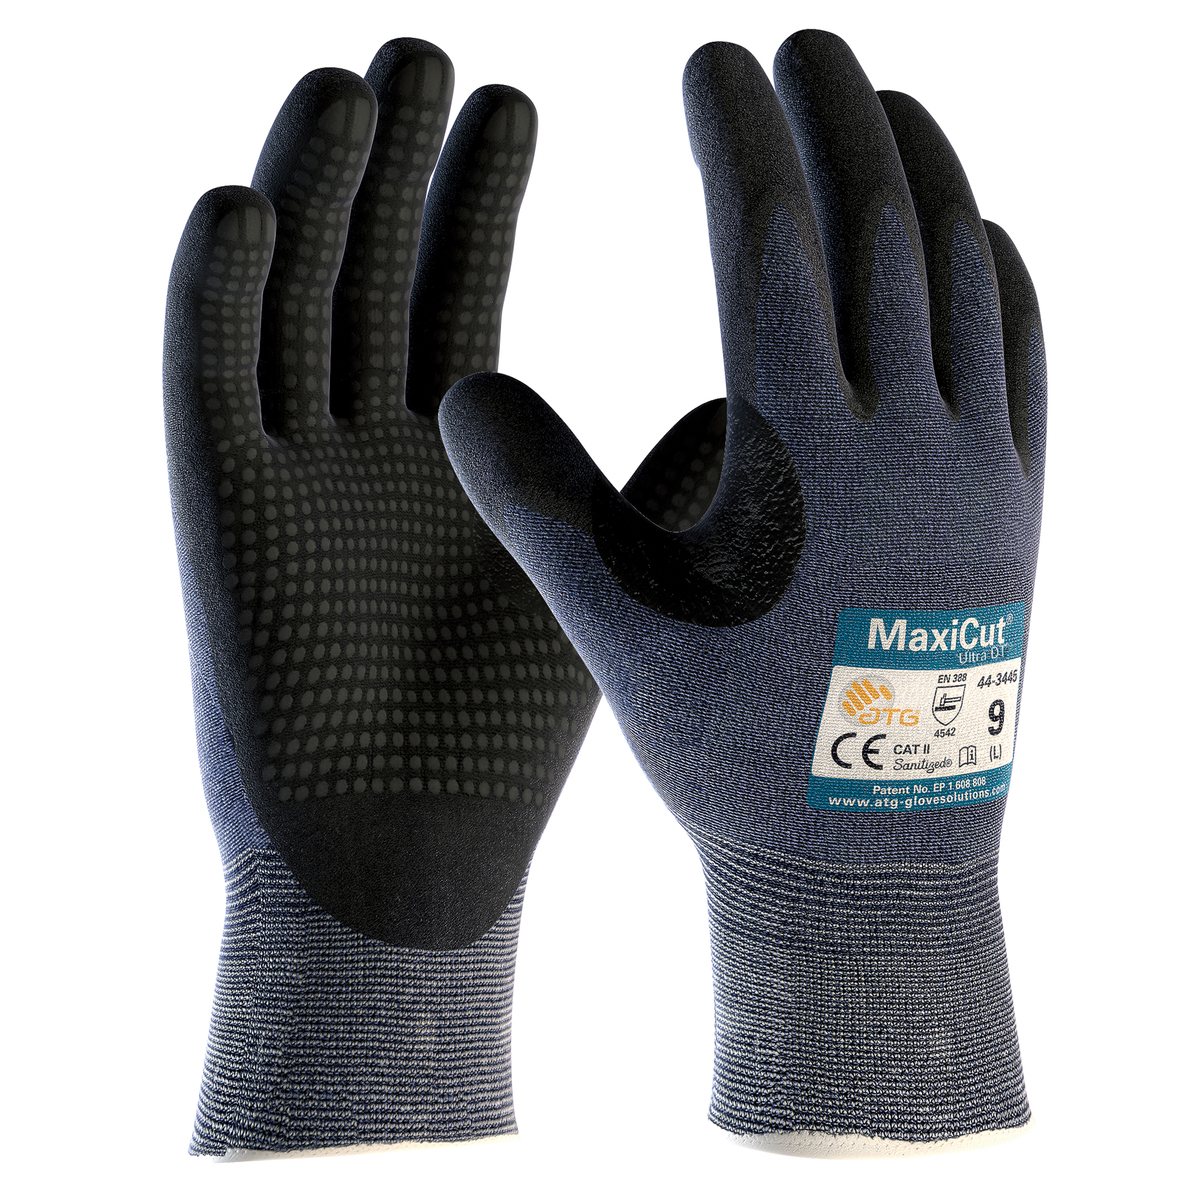 PIP® 2X MaxiCut® Ultra DT™ 15 Gauge Engineered Yarn Cut Resistant Gloves With Nitrile Coating